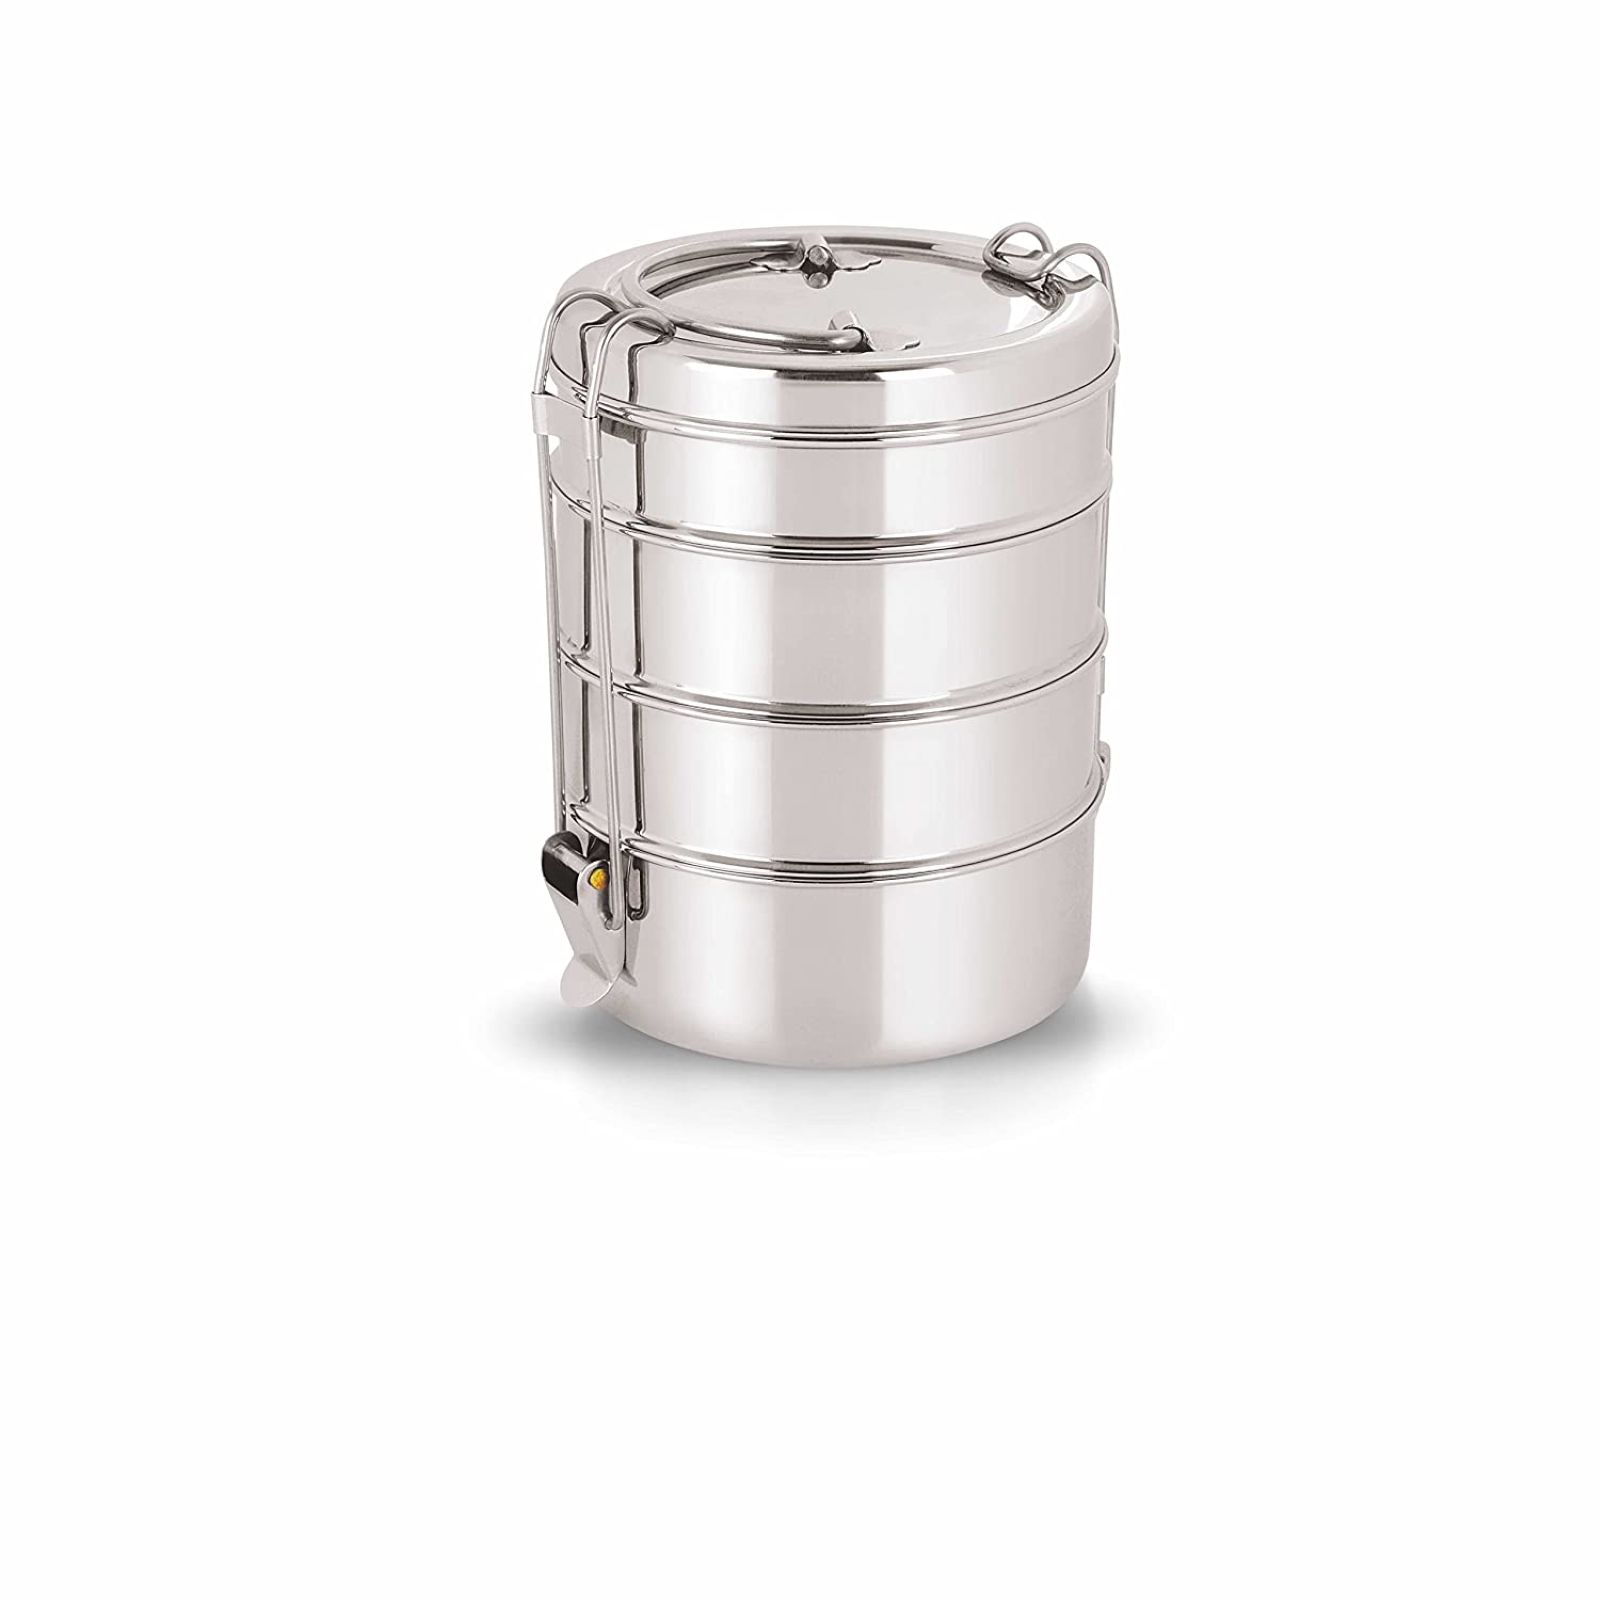     			Neelam Stainless Steel Lunch Box/Traditional Tiffin Box for School/Office- 9 x 4